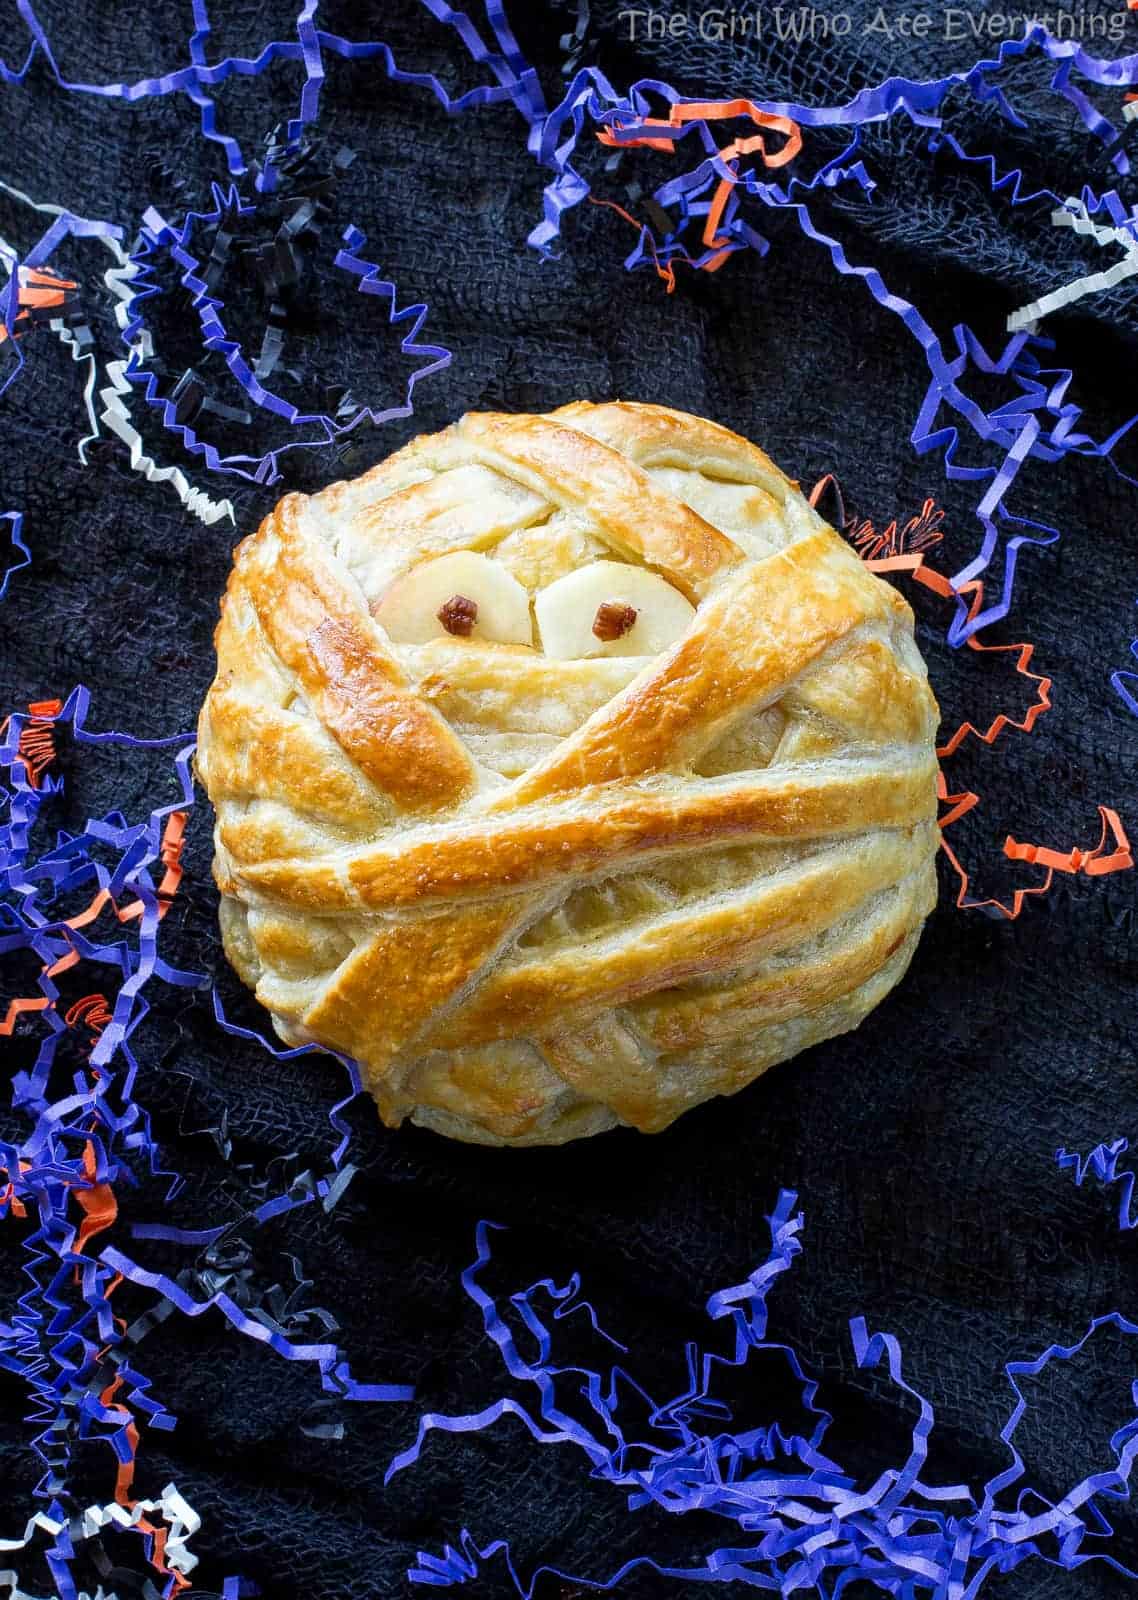 Mummy Wrapped Brie - topped with brown sugar and cinnamon pecans, baked inside puff pastry until nice and gooey. The best appetizer for Halloween! the-girl-who-ate-everything.com